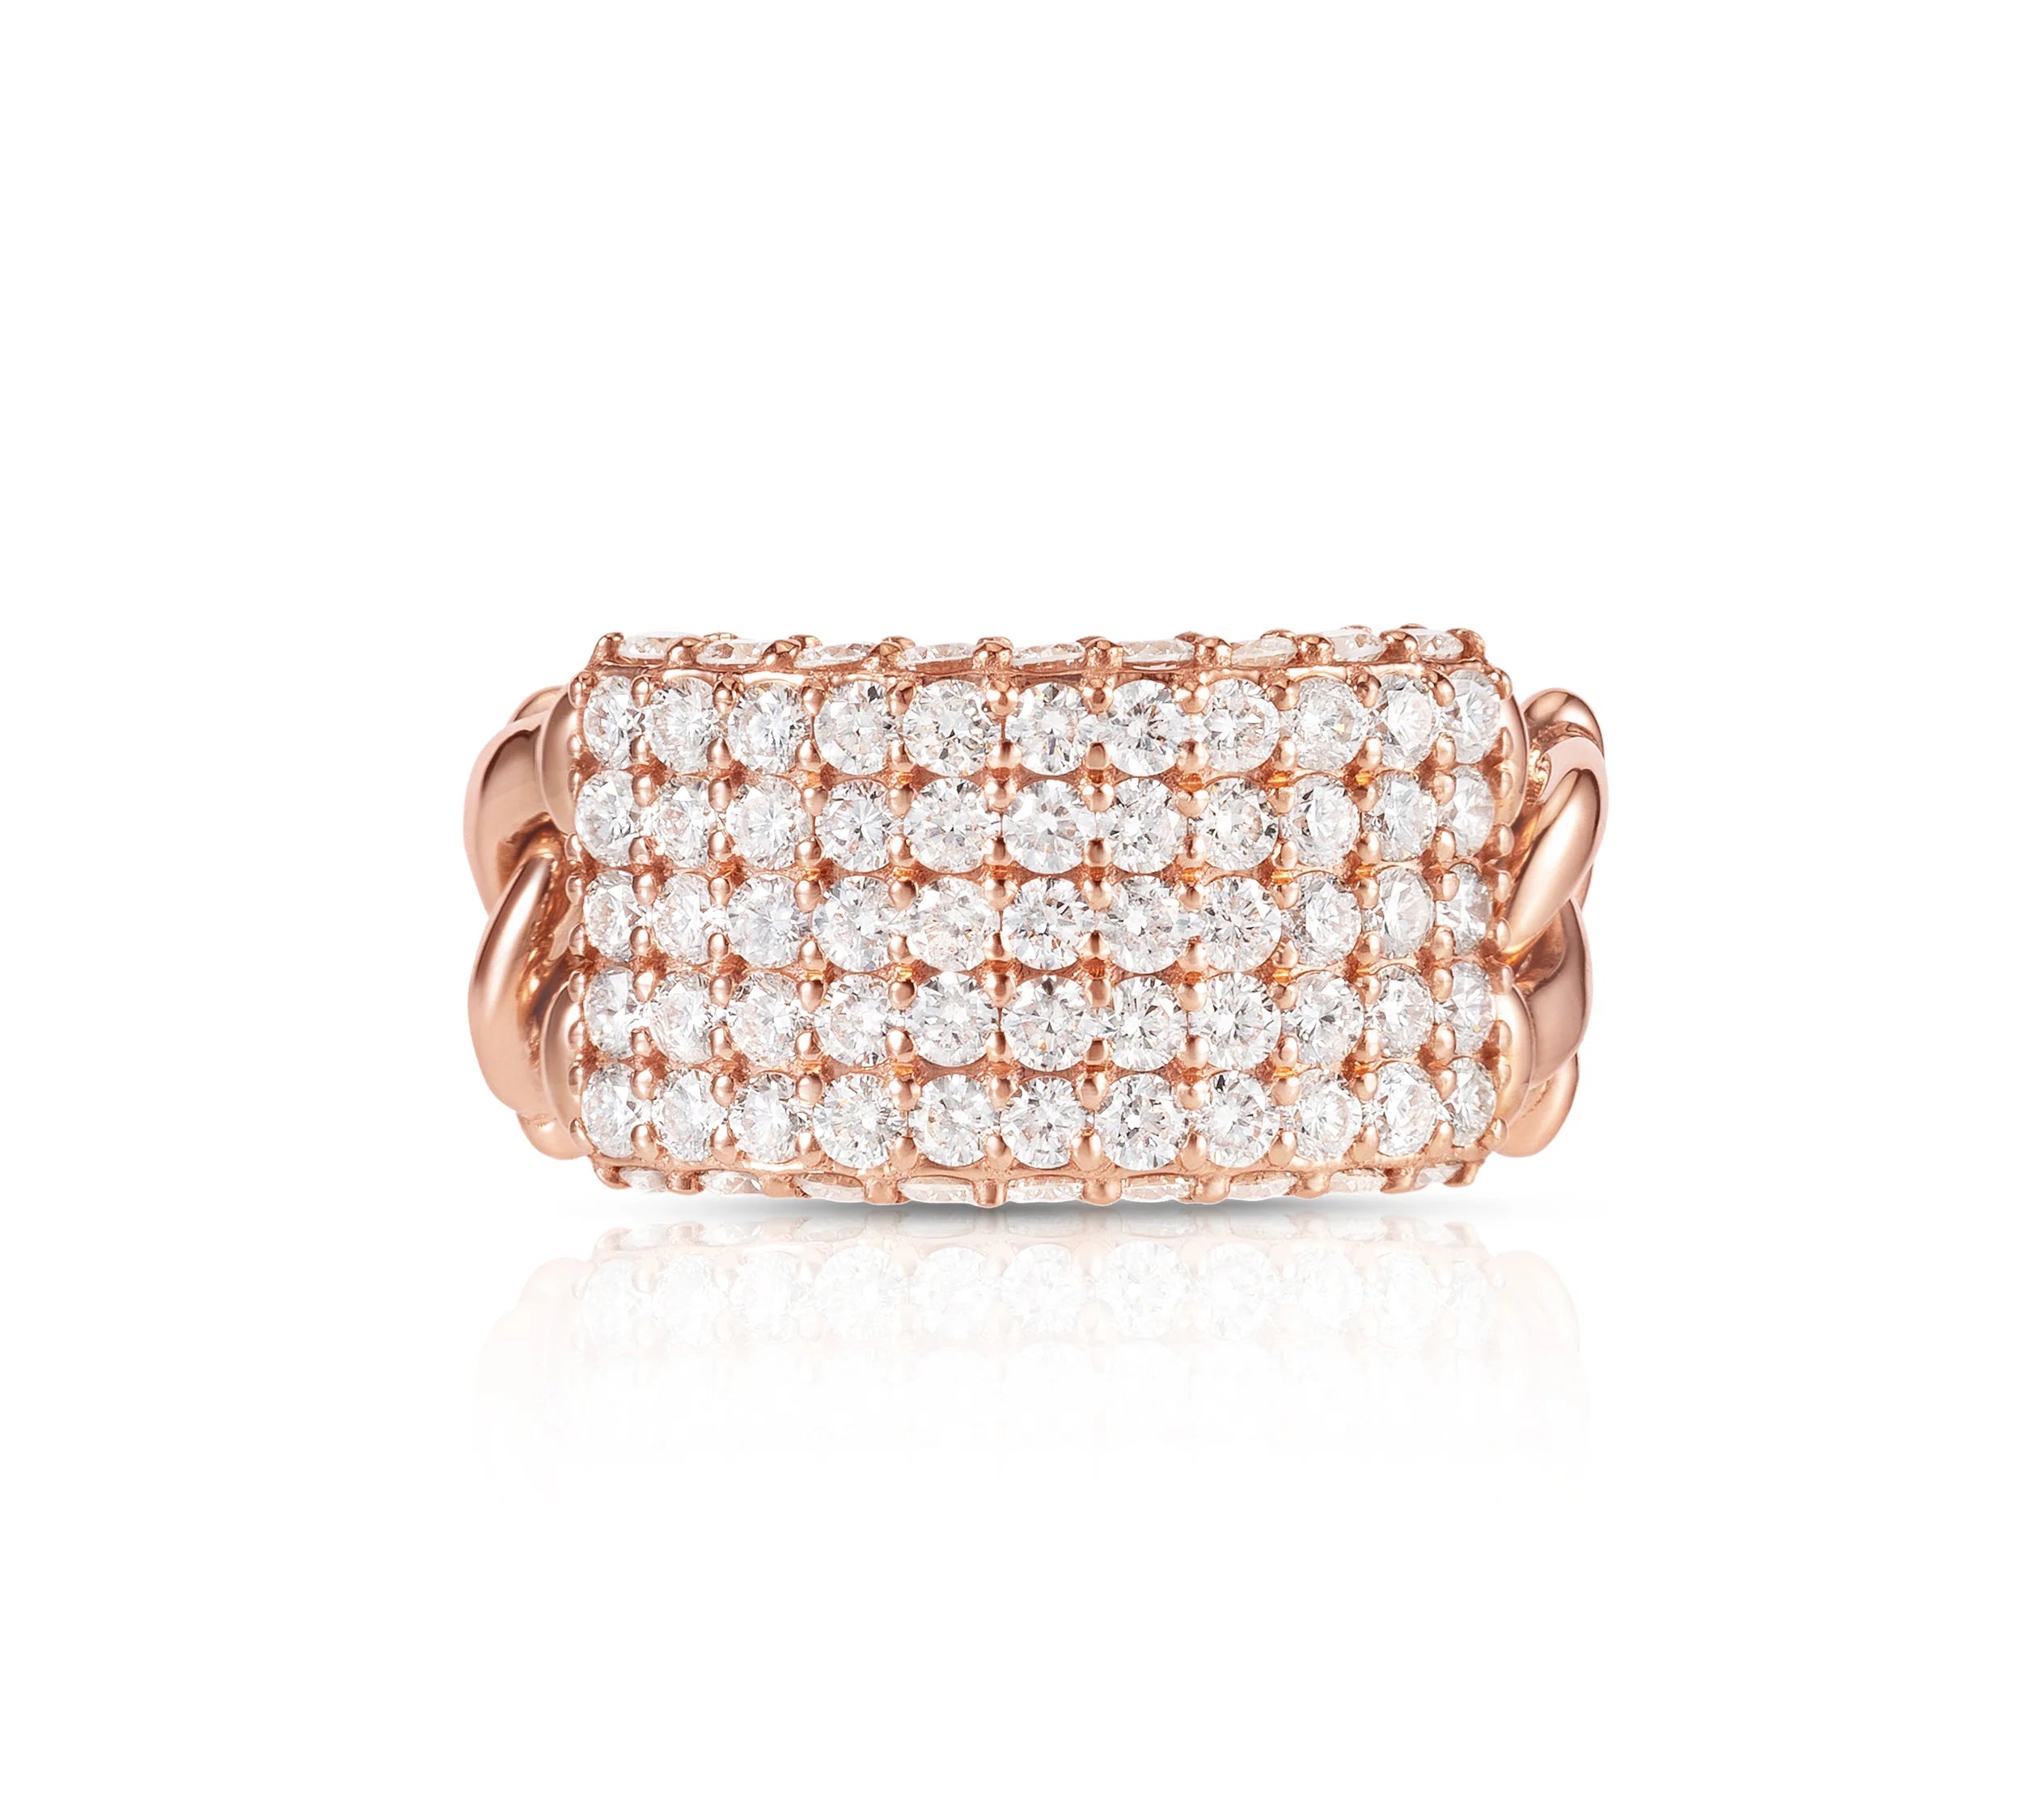 Diamond ID Link Ring Statement Carbon and Hyde Rose Gold  